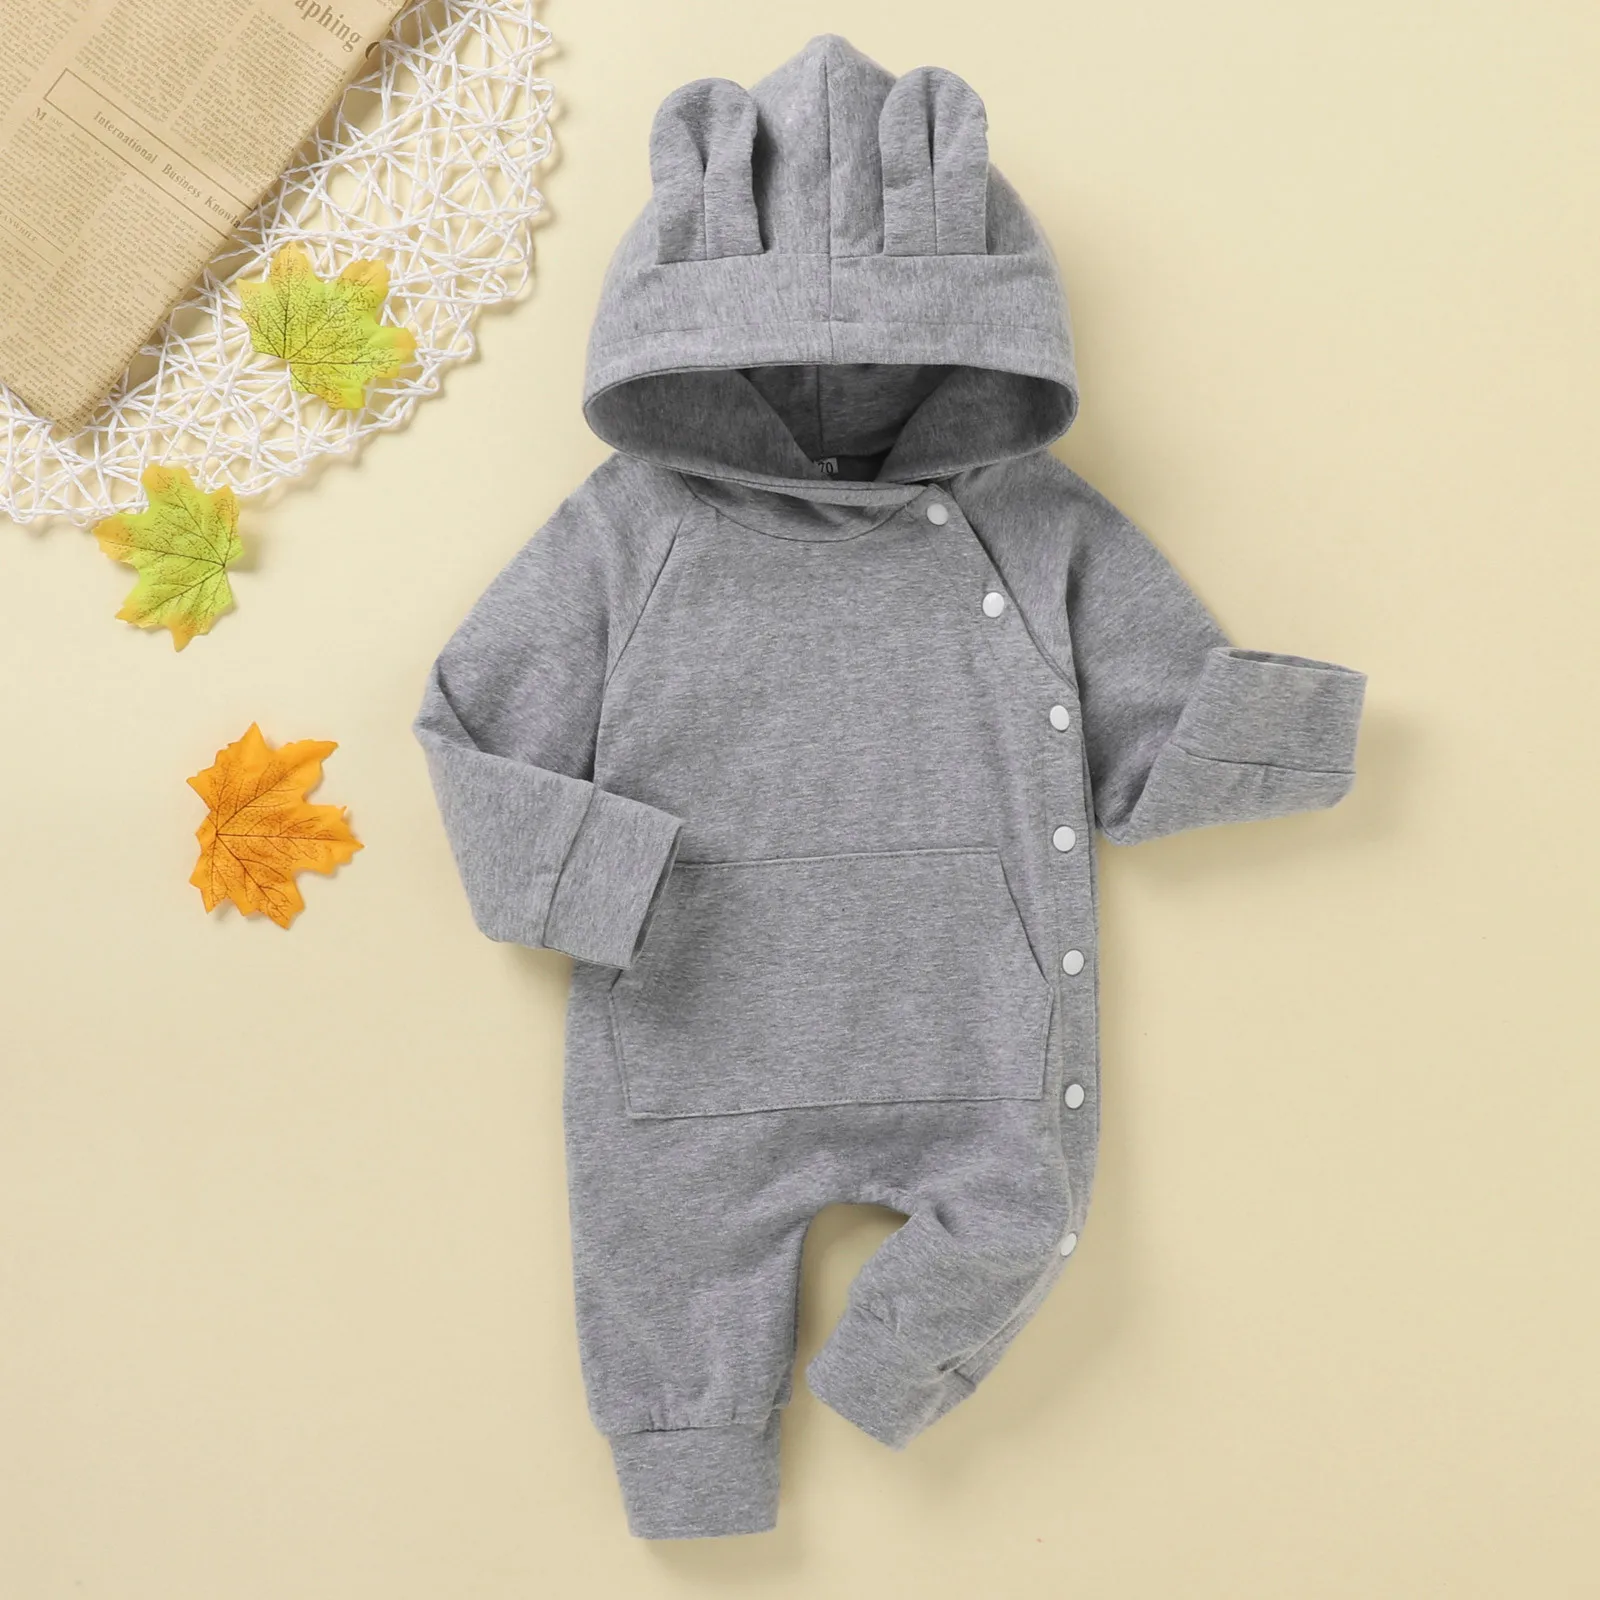 Newborn Infant Baby Girls&Boys Long Sleeve Solid Hooded Jumpsuit Romper Clothes 